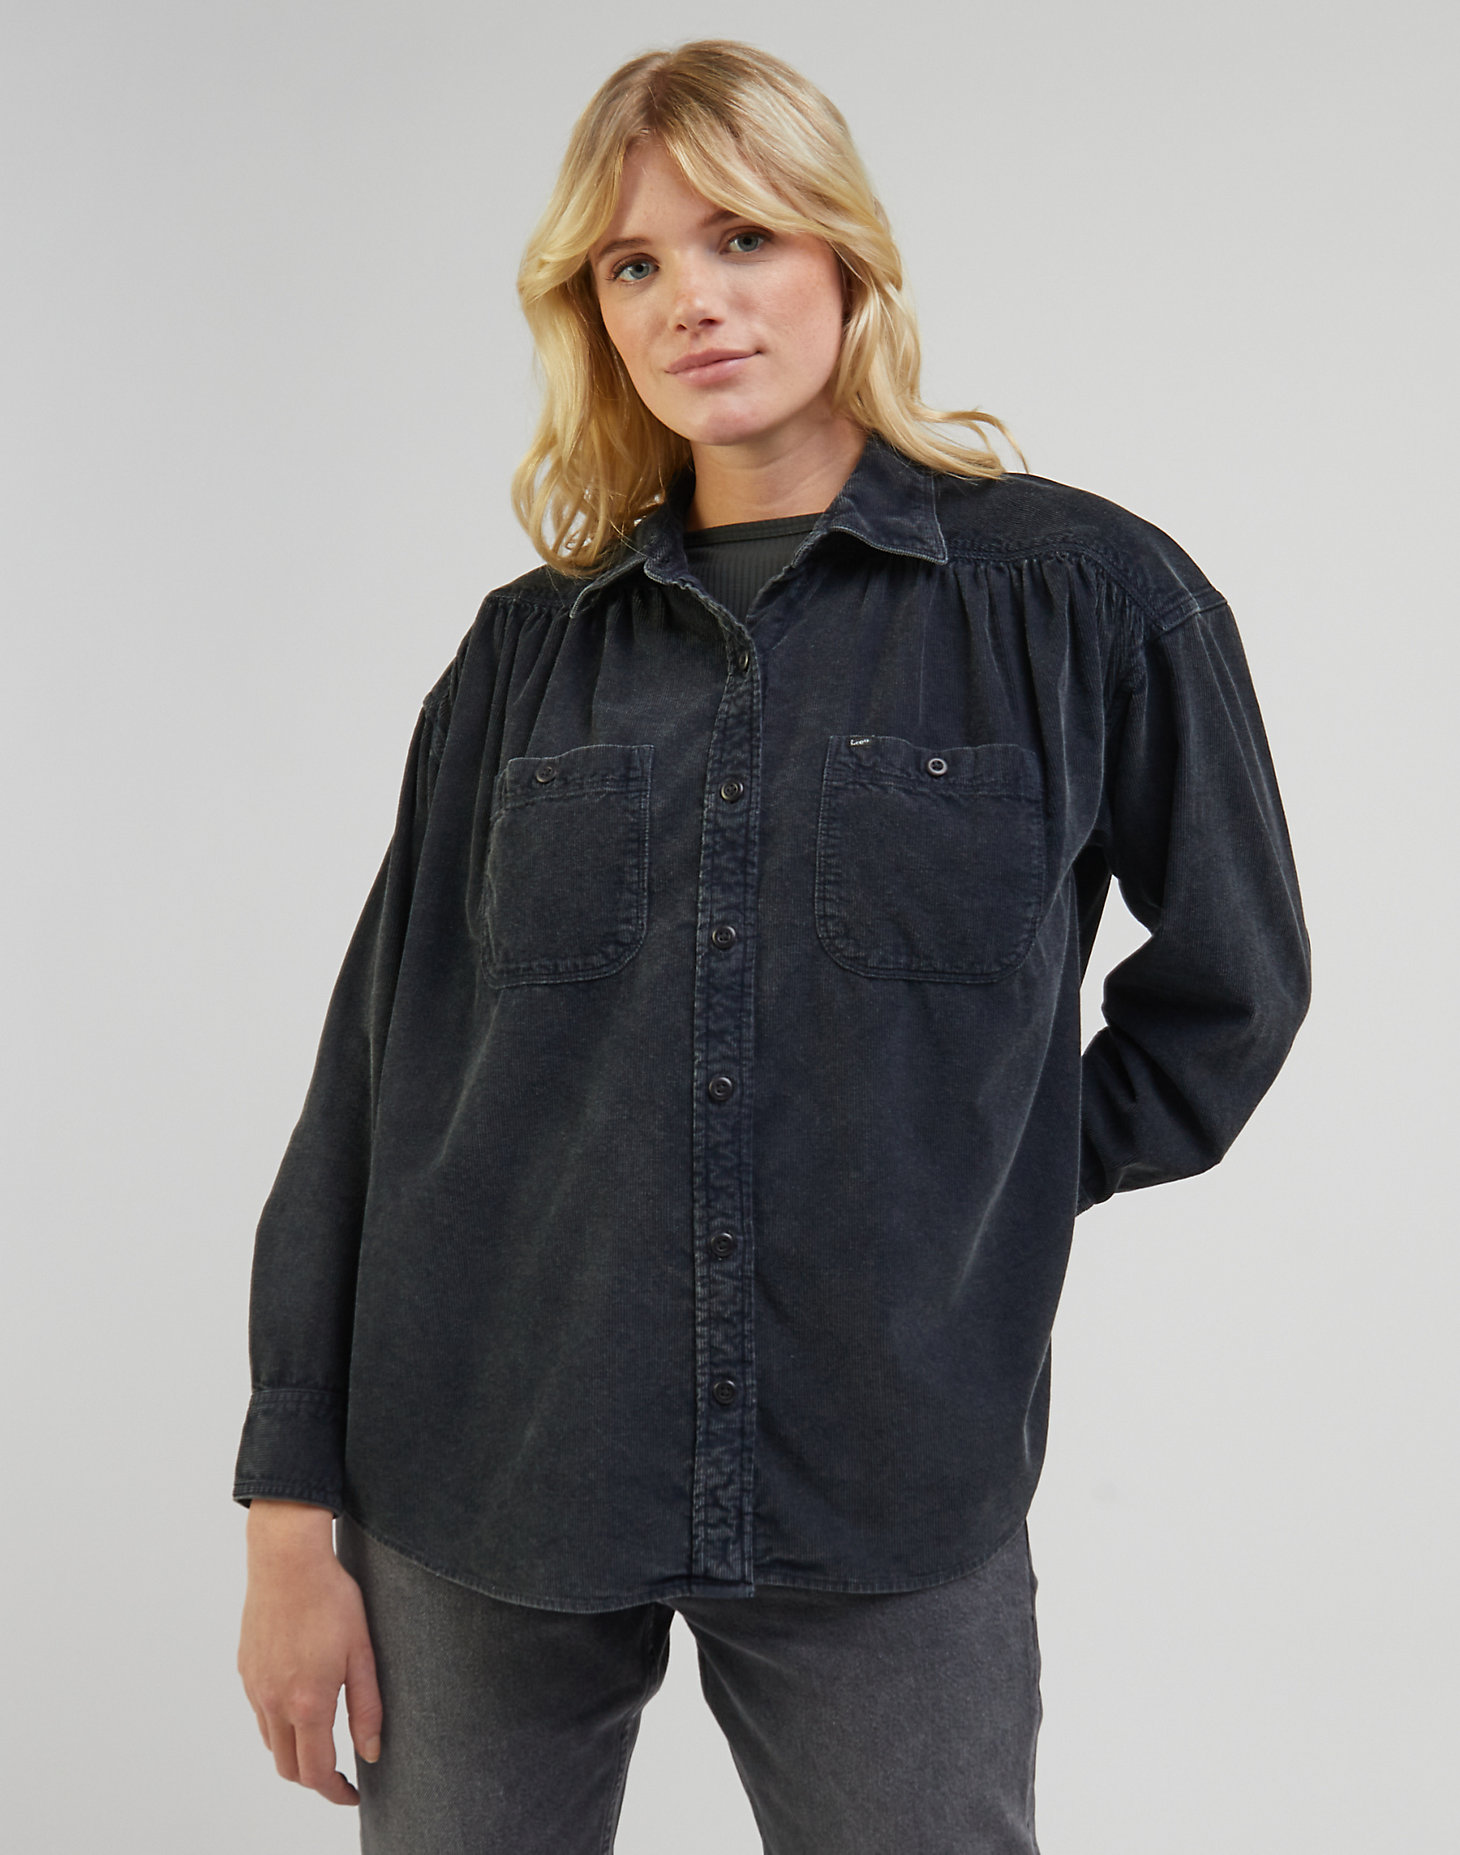 Frontier Shirt in Charcoal main view